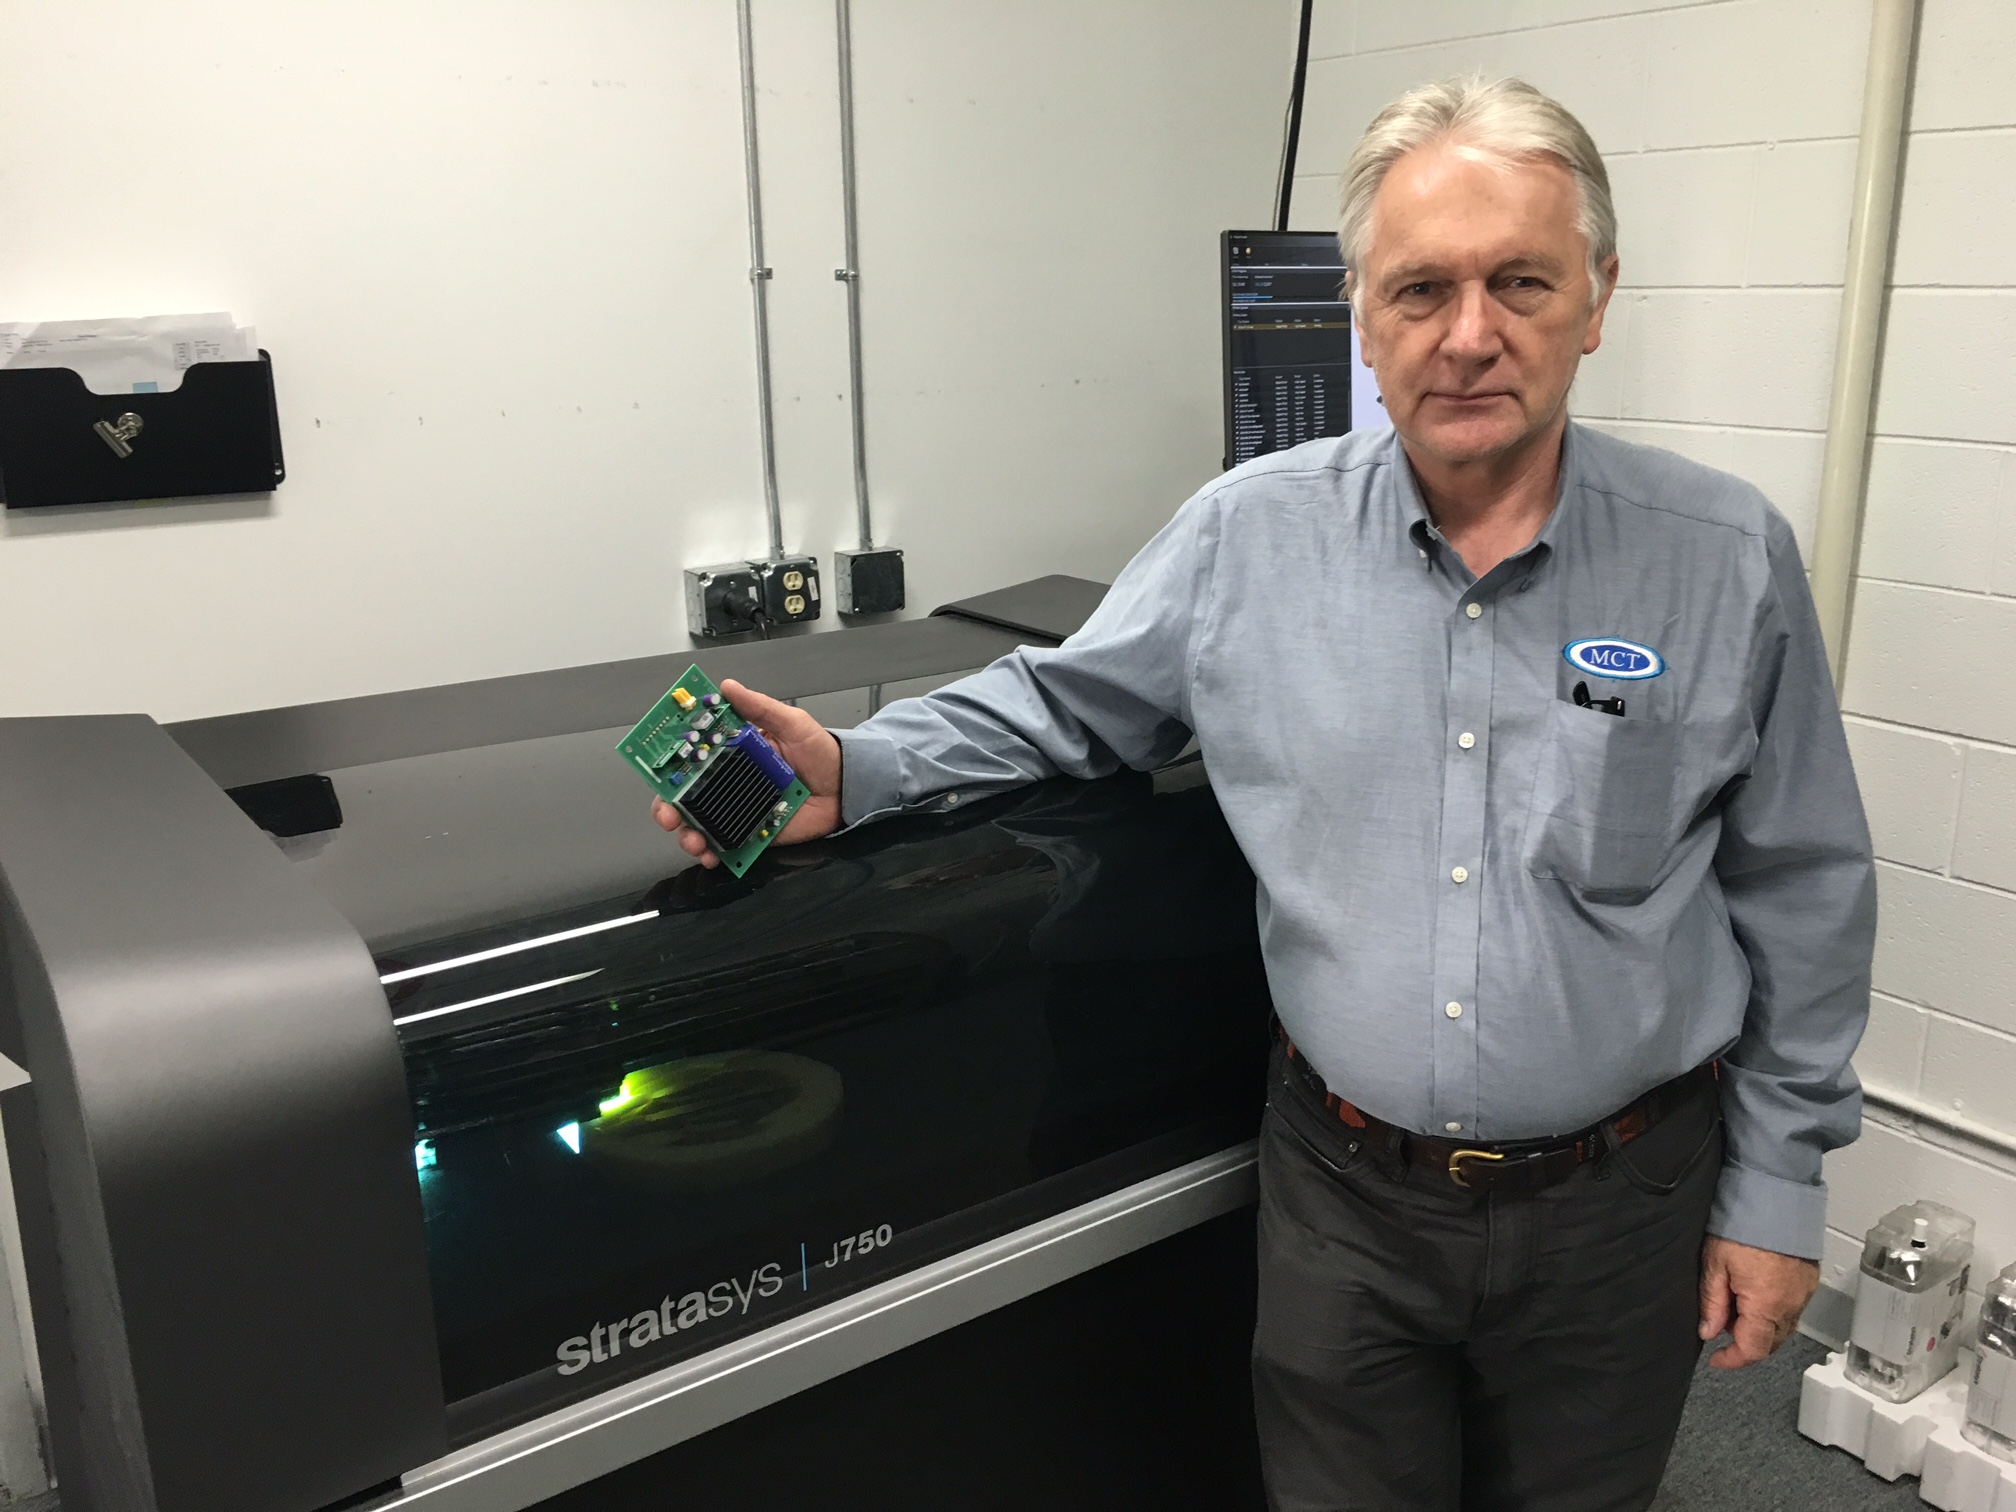  Midwest Composite Technologies' Helmut Keidel with his new Stratasys J750 full color 3D printer 